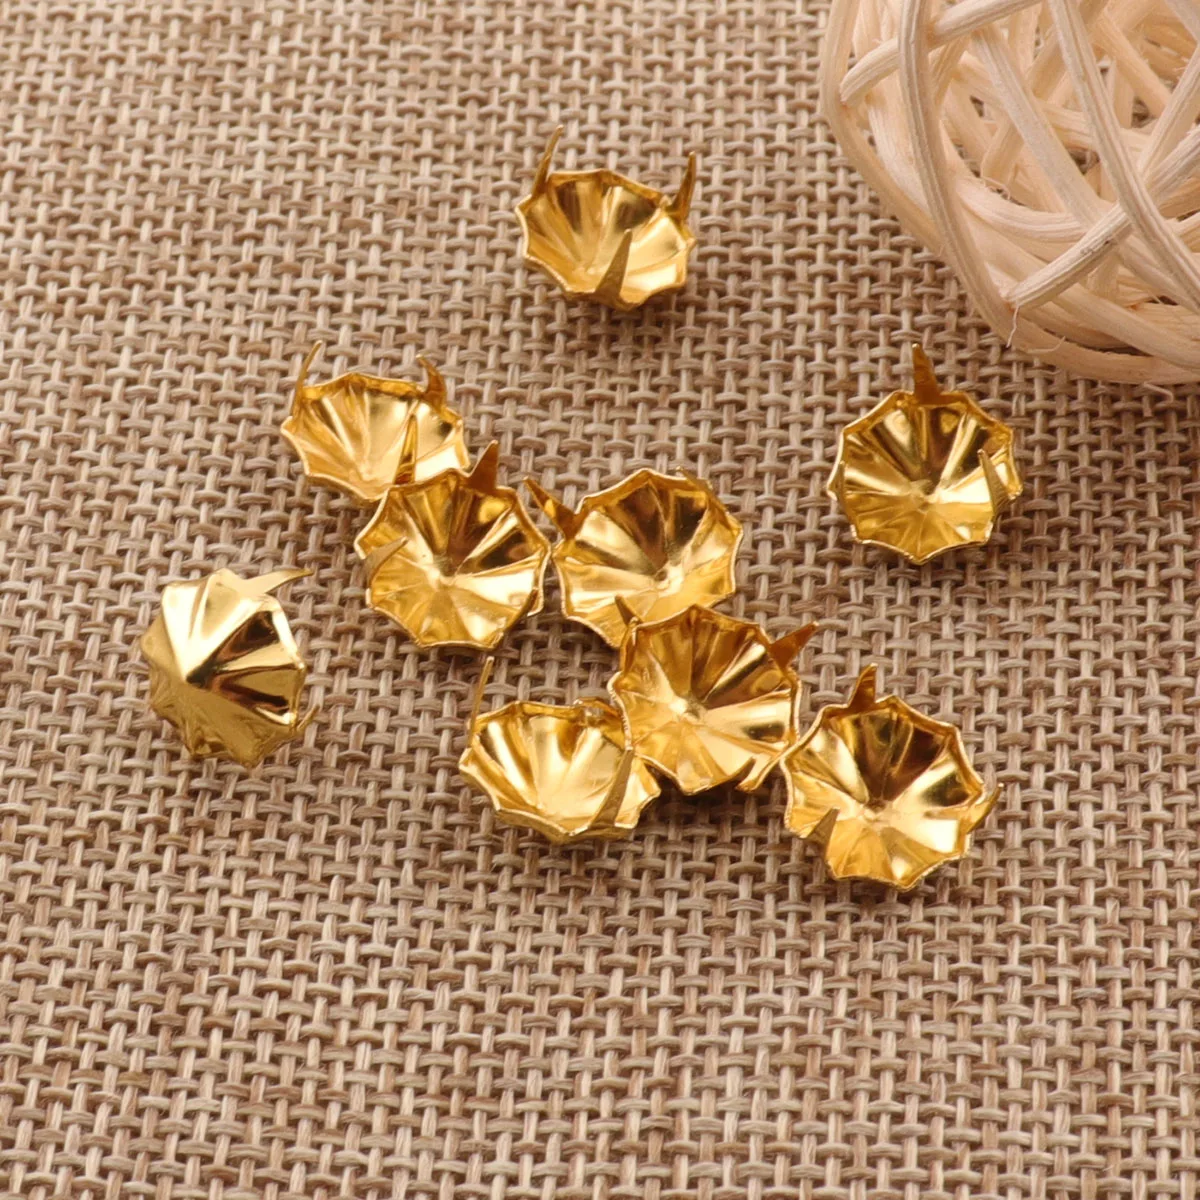 

100 PCS 3/8" Gold Nailhead Round Stud Rivets Fastener Snaps Prong Leather Craft Rapid Nailheads-11mm